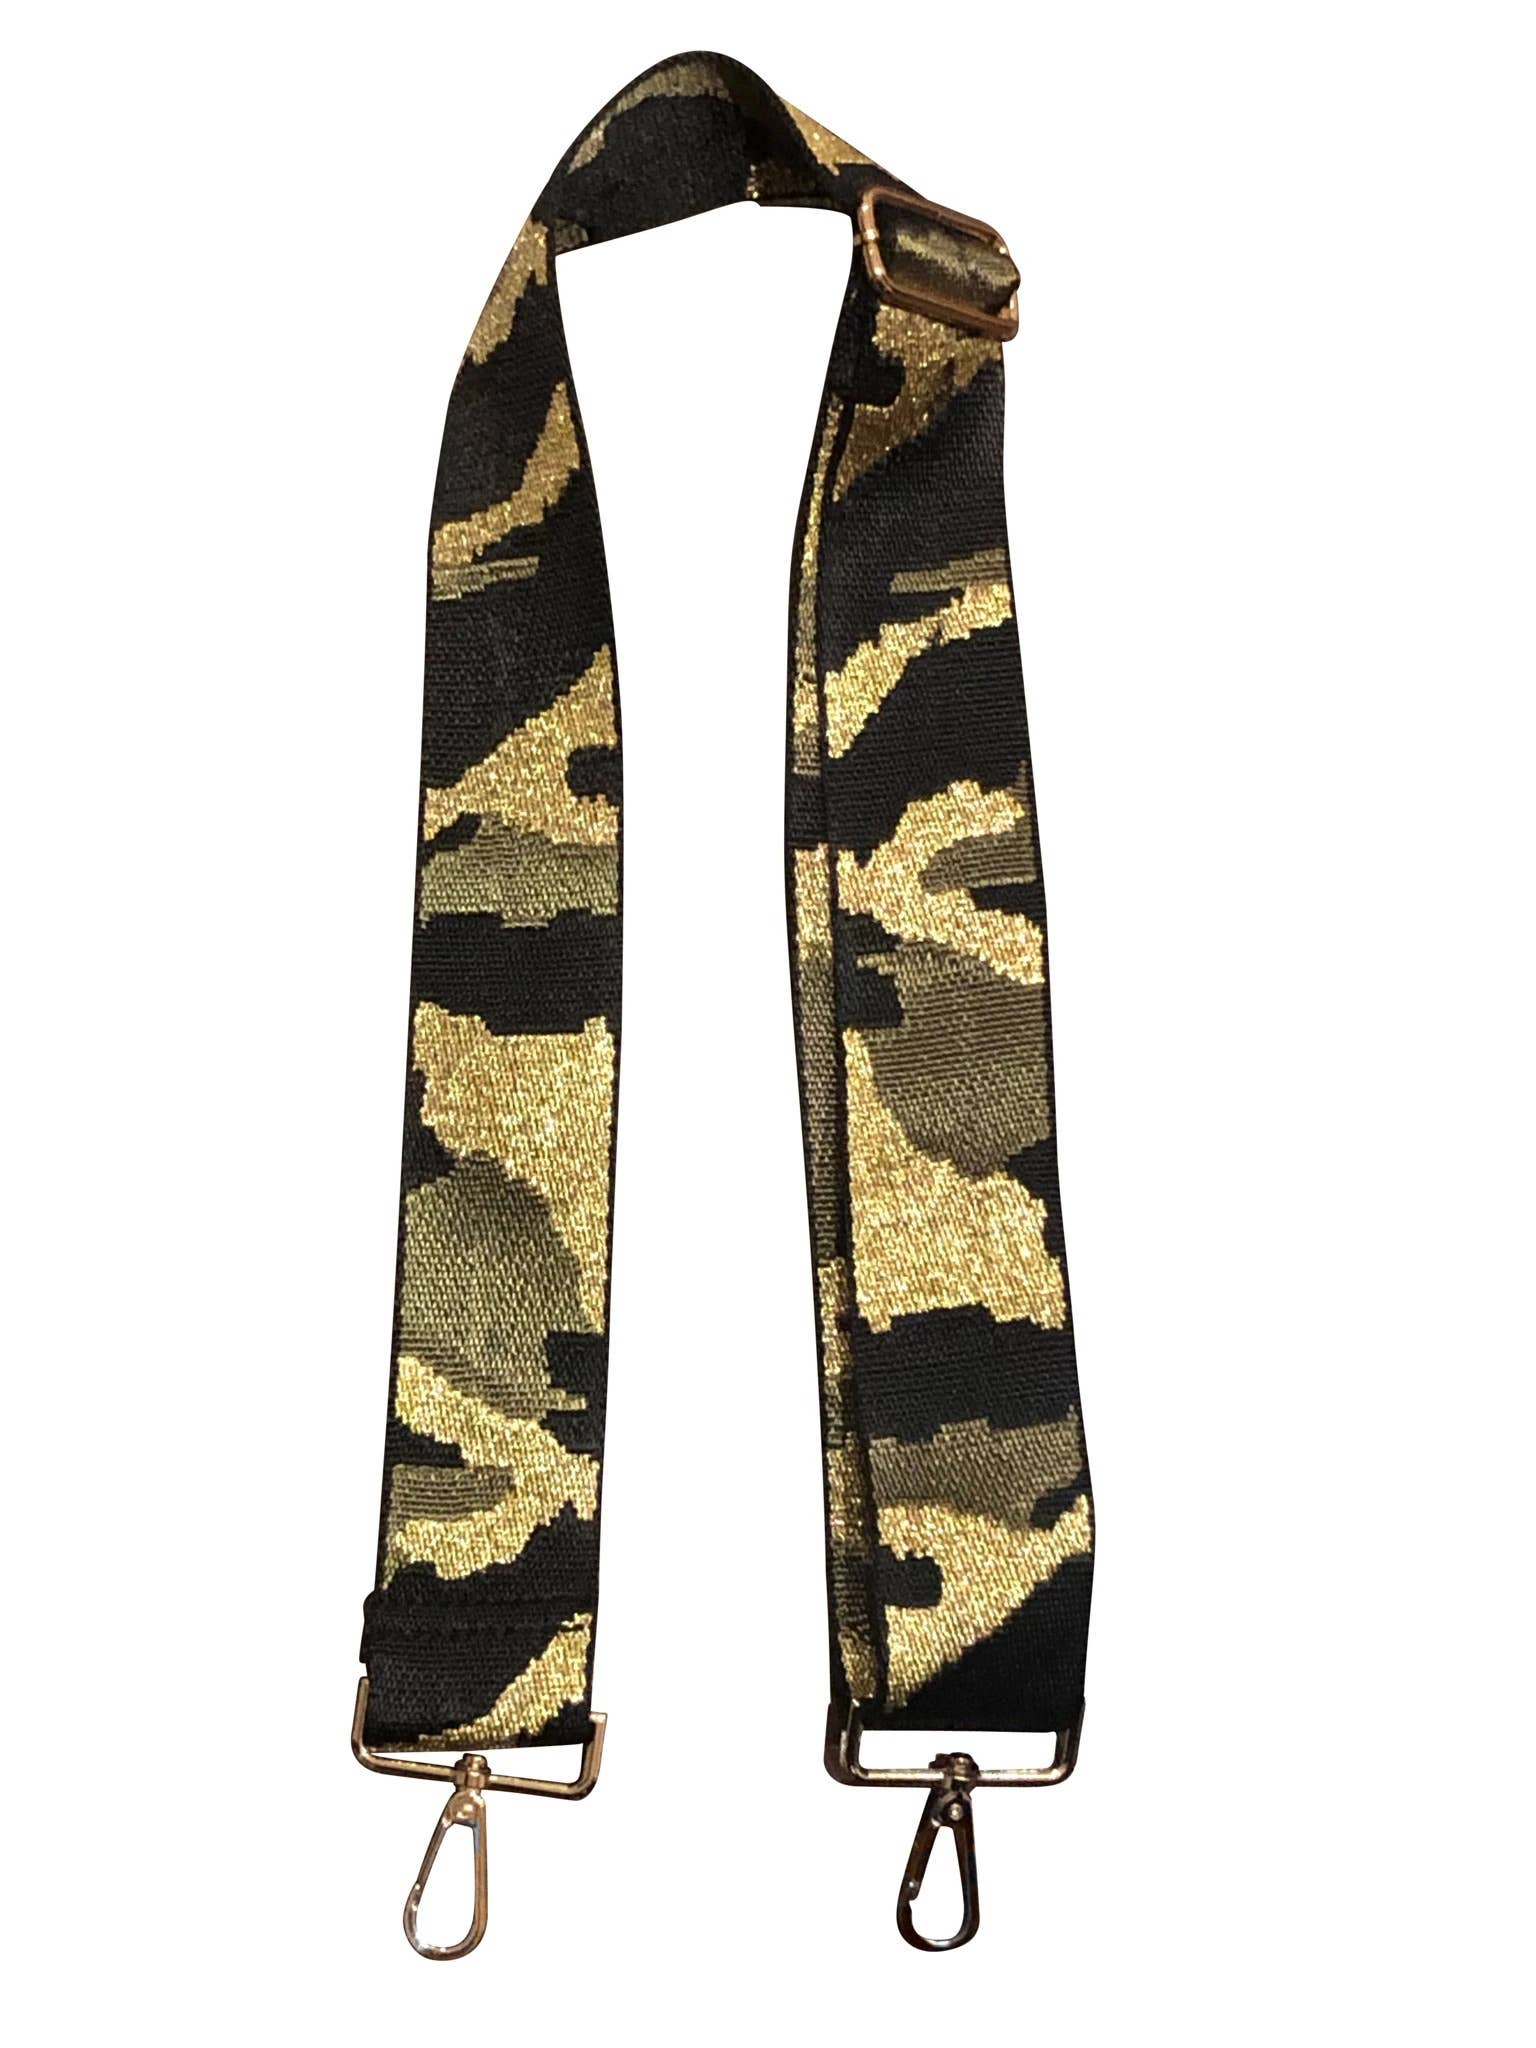 Army Camouflage Bag Strap-Gold Hardware